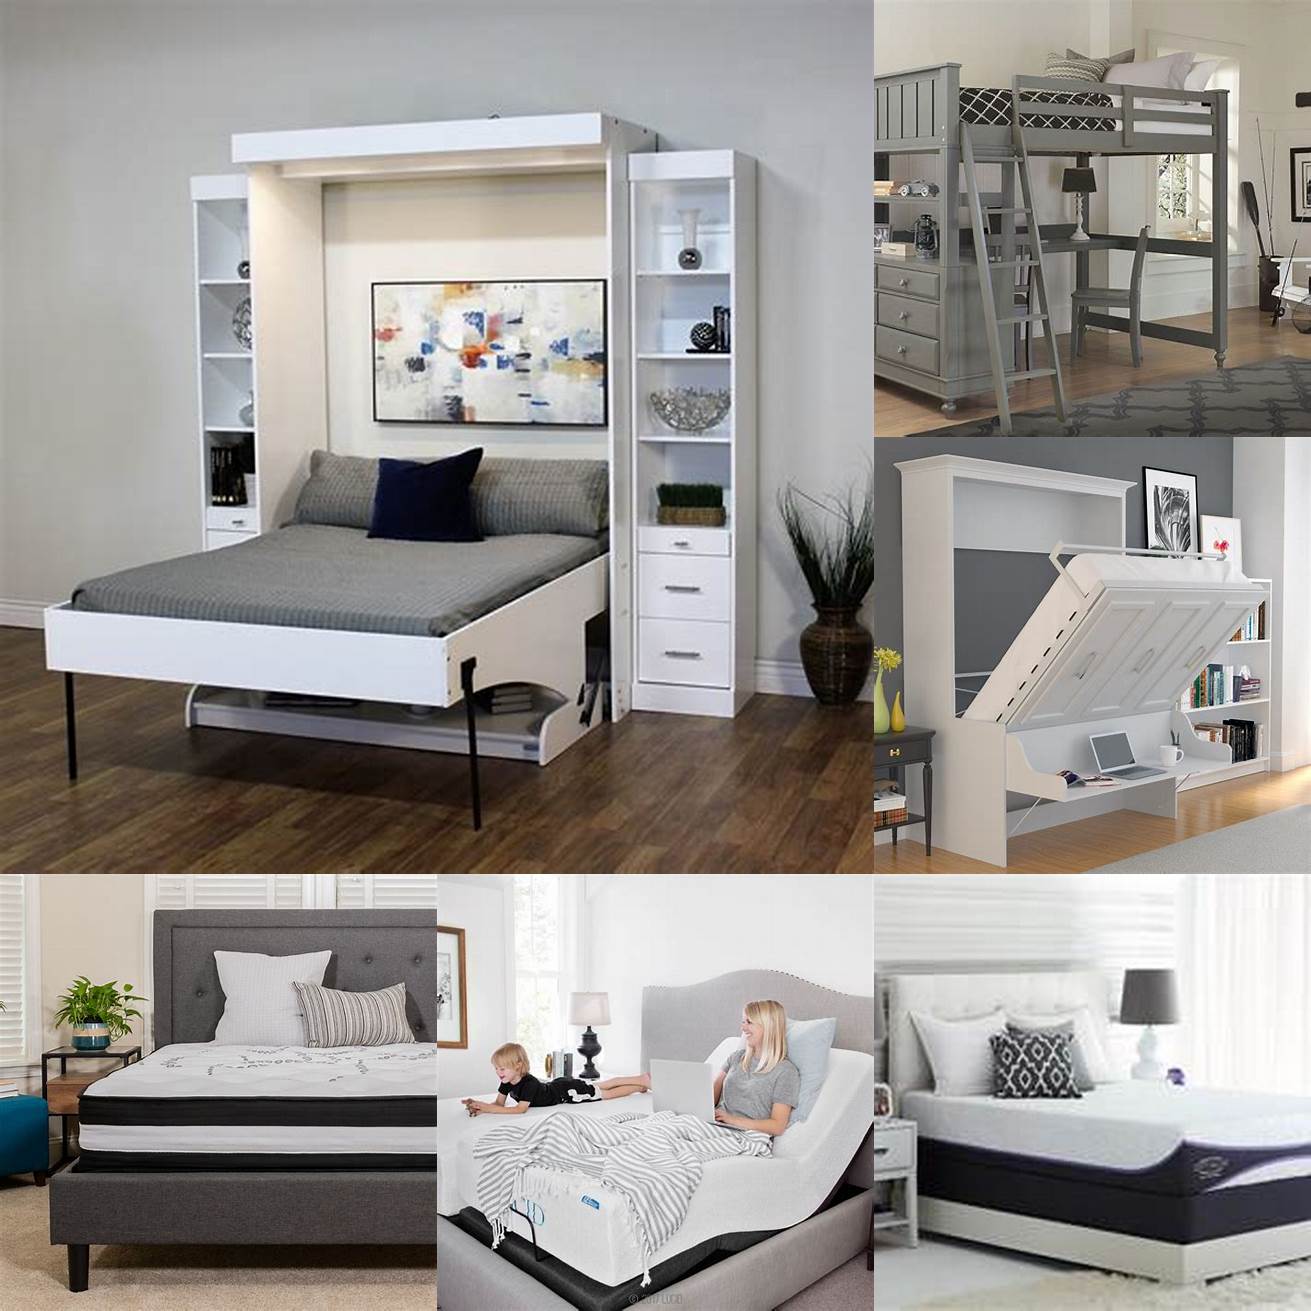 Comfort Make sure to choose a Desk Bed that comes with a comfortable mattress for a good nights sleep